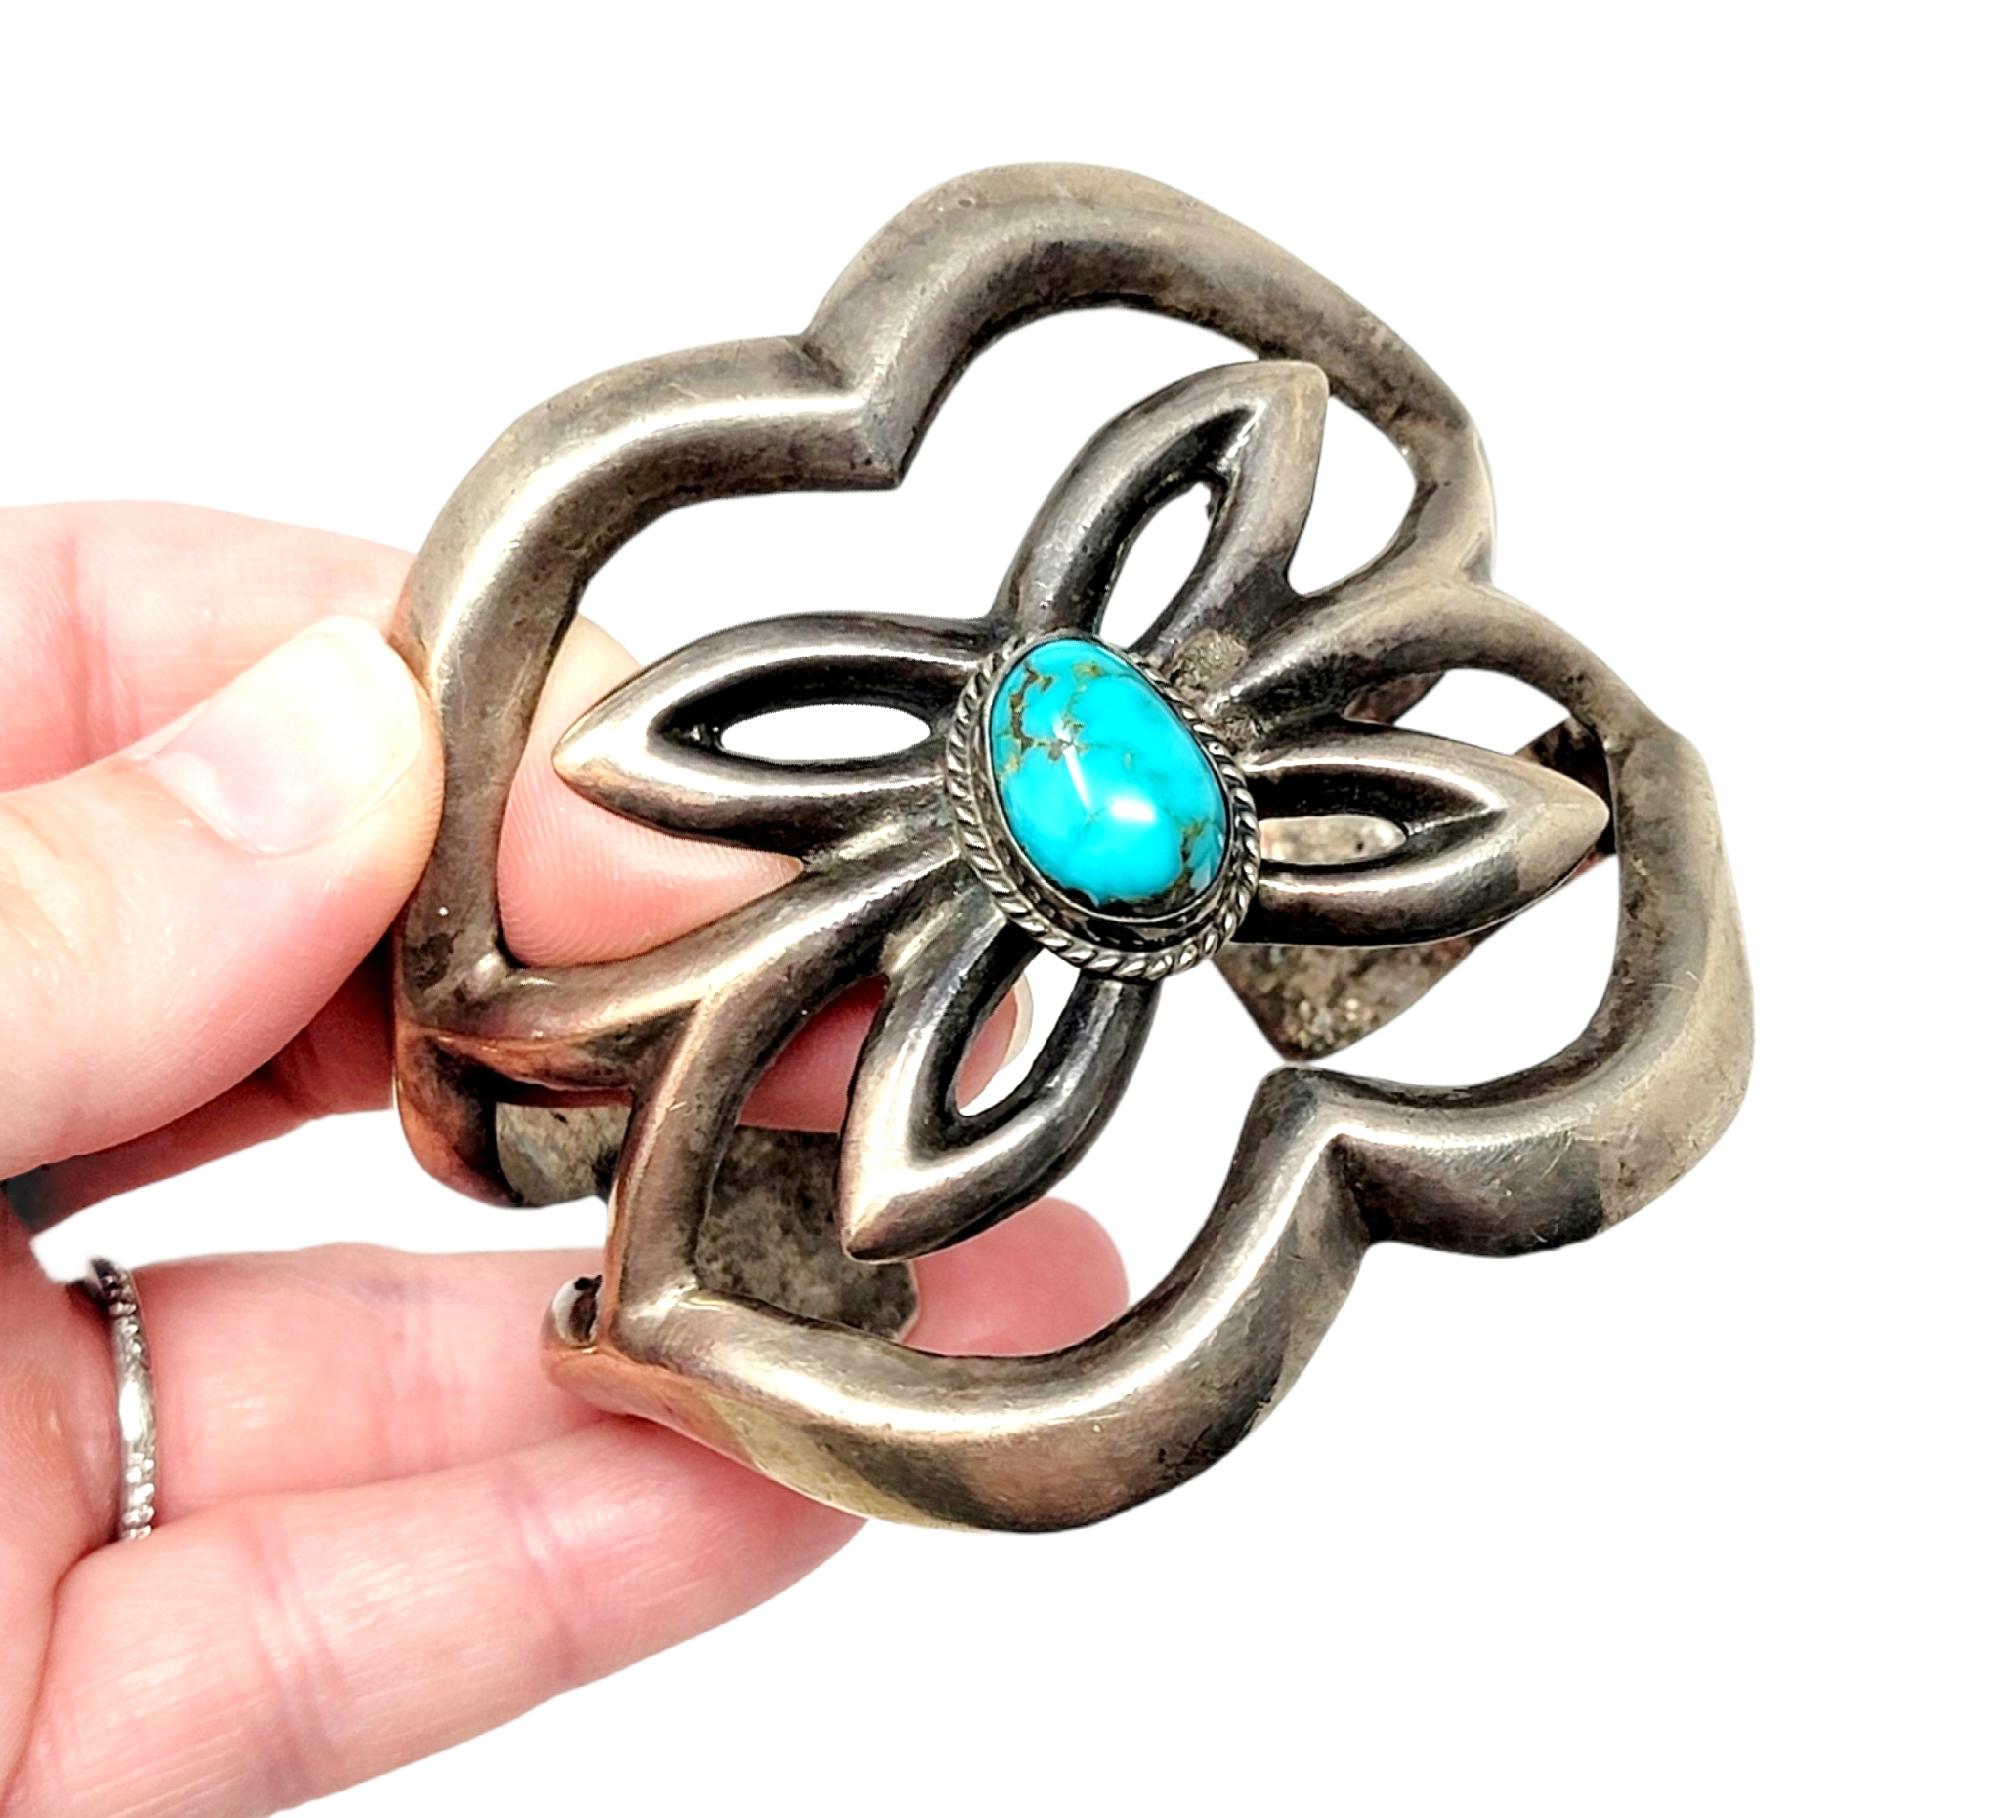 Stunning bold sterling silver and natural turquoise cuff bracelet. This wide, artfully constructed piece features a chunky, wide Navajo design accented by a single bezel set cabochon turquoise stone. This incredible bracelet fills the whole wrist